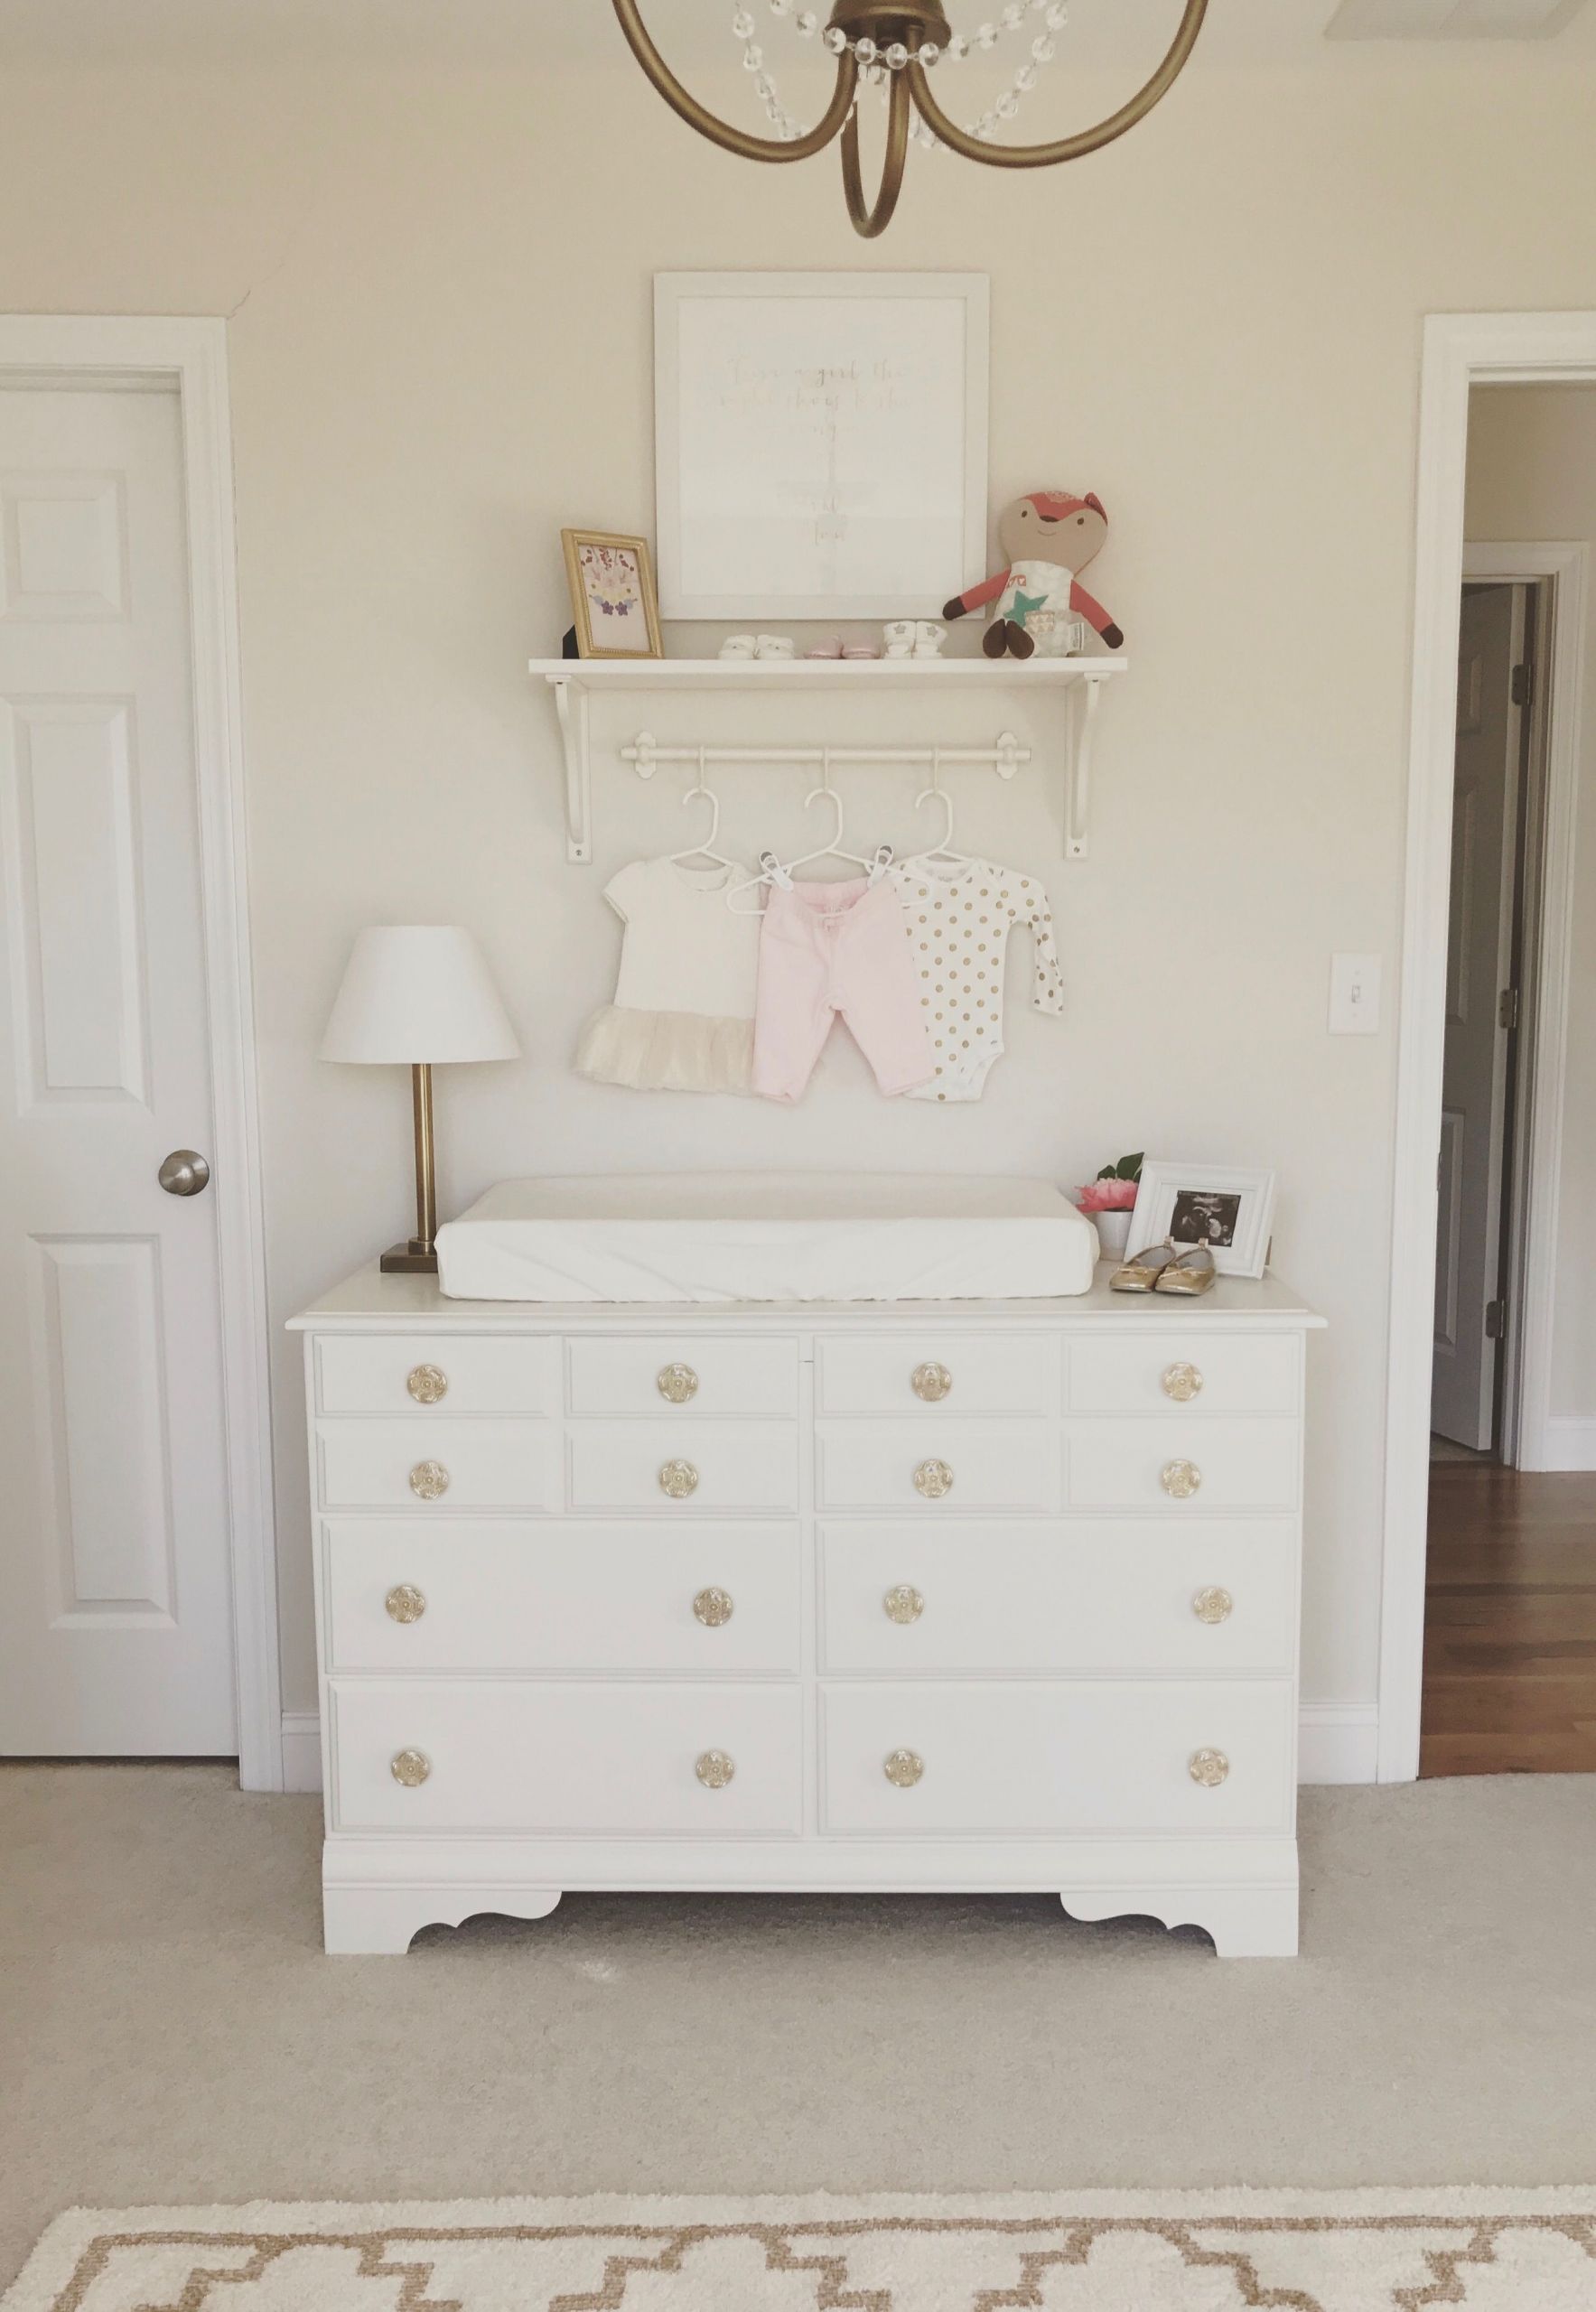 Dresser For Baby Room
 Pin on Baby